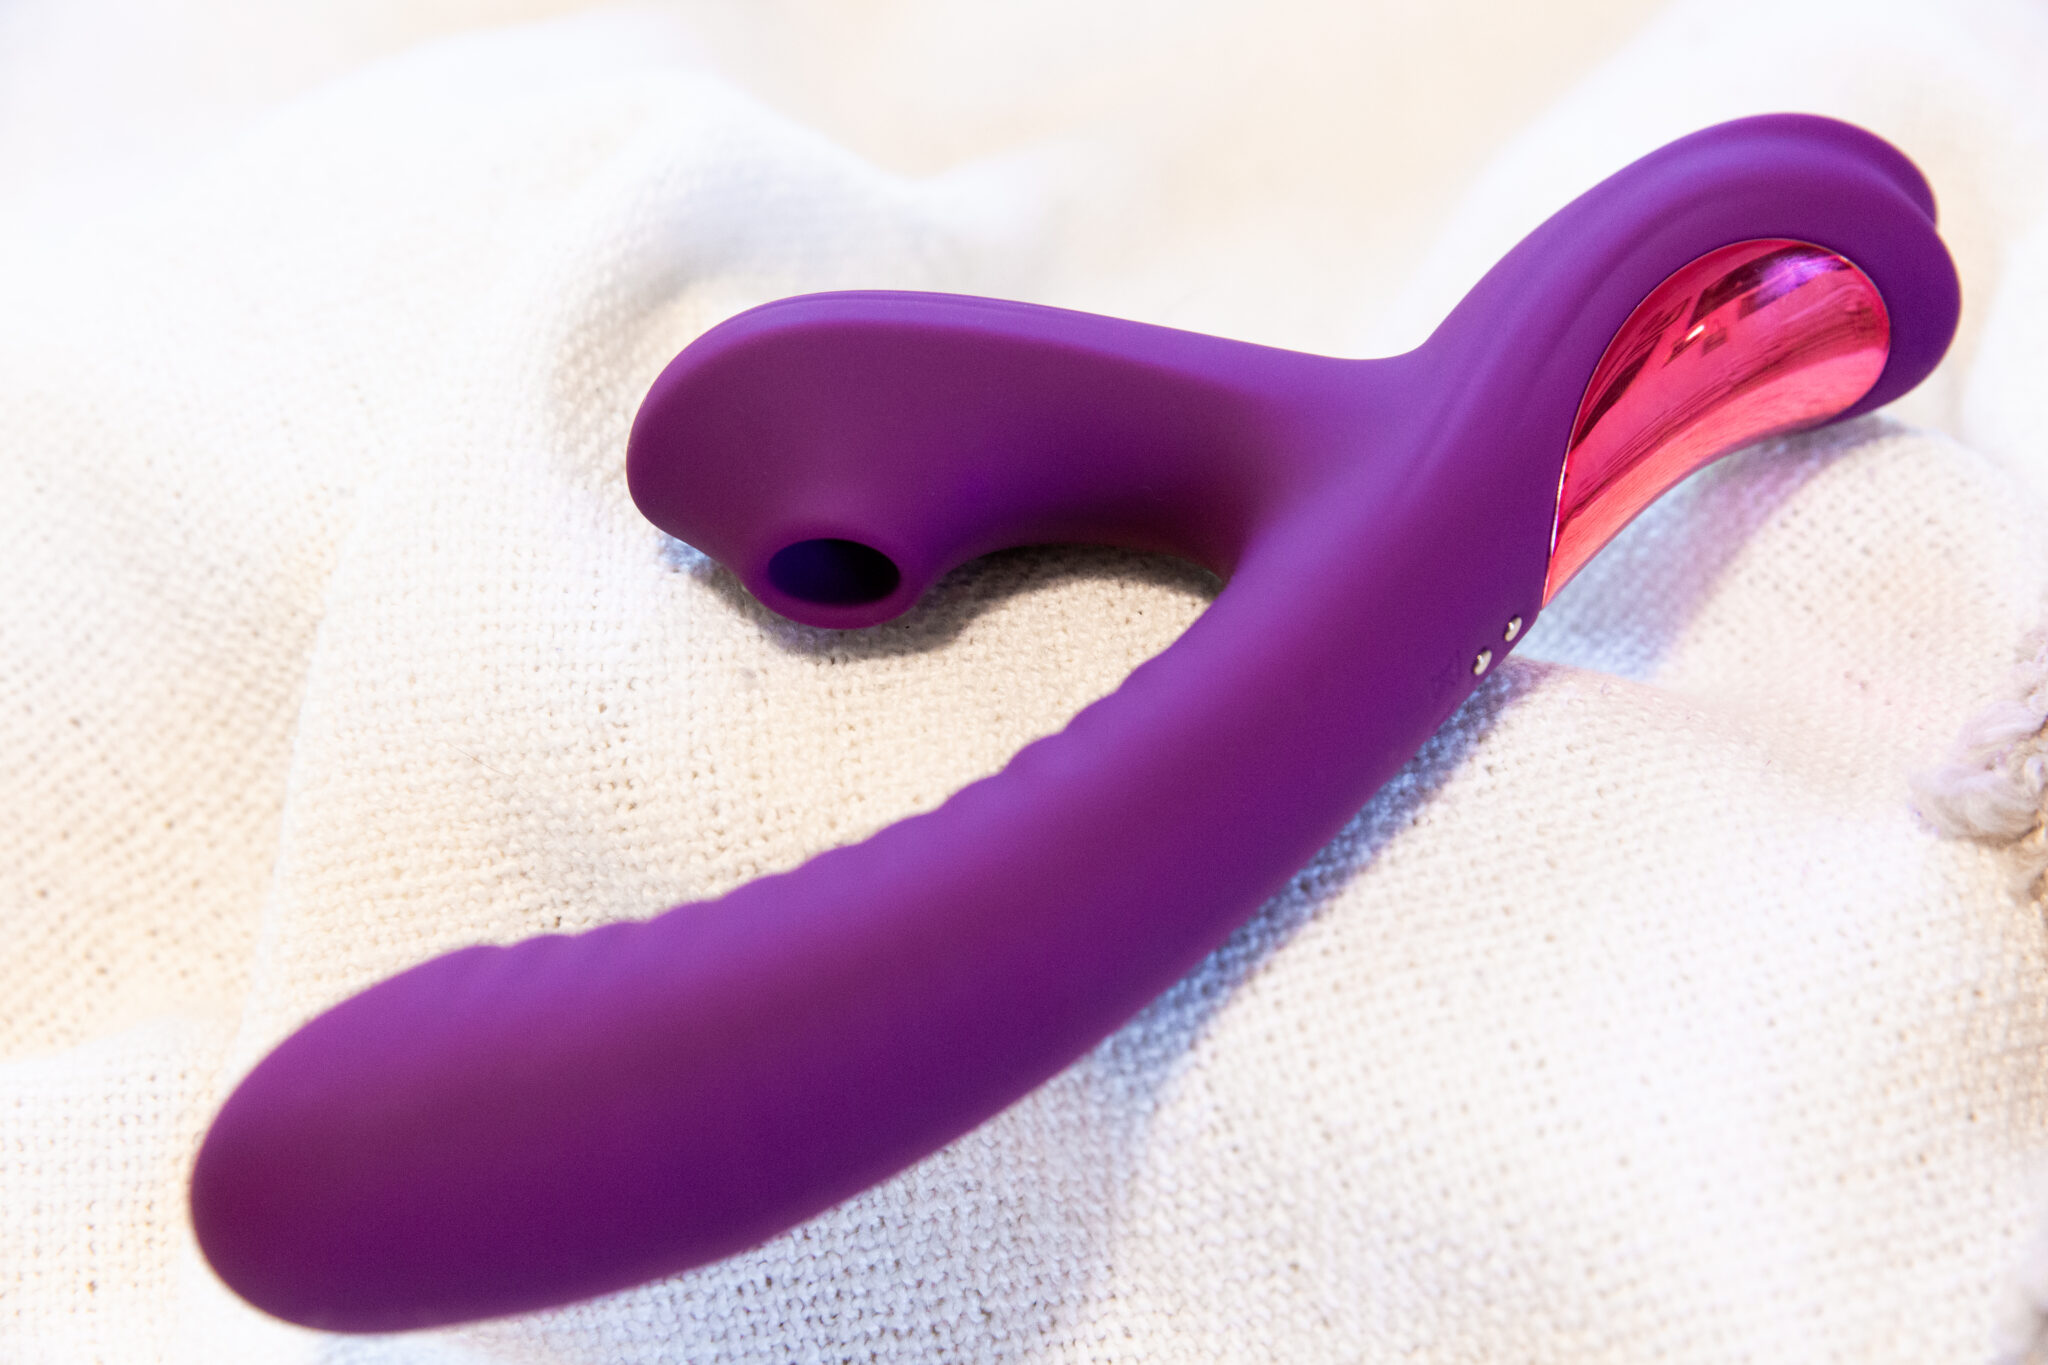 A full image of the Tracy's Dog Beta sex toy for women, feature a clit-sucking tip.